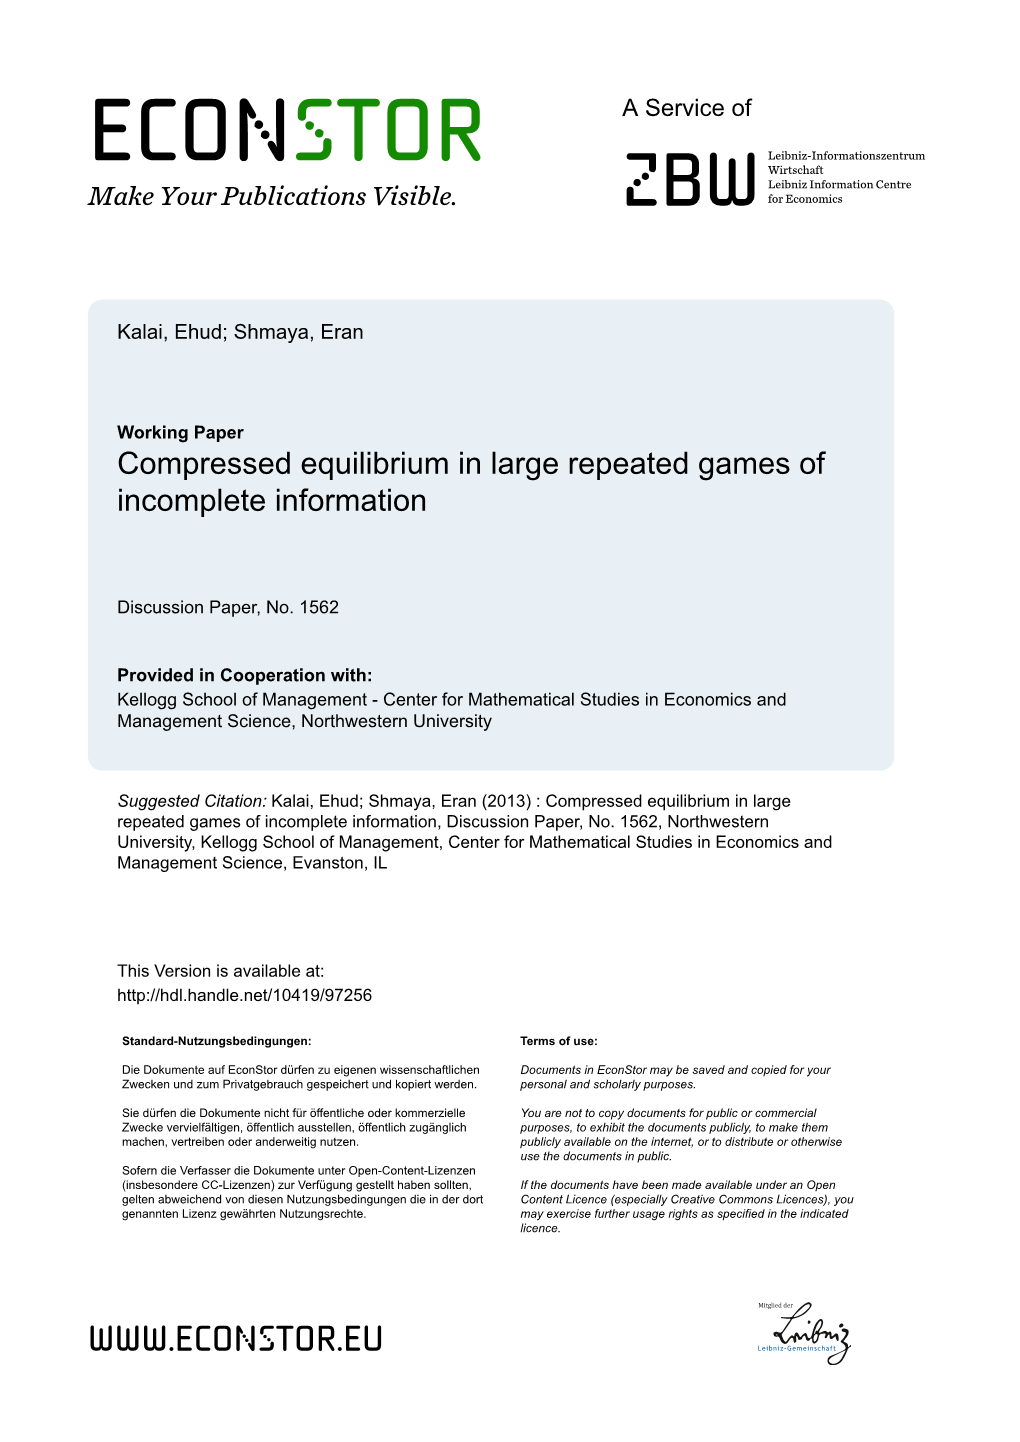 Compressed Equilibrium in Large Repeated Games of Incomplete Information